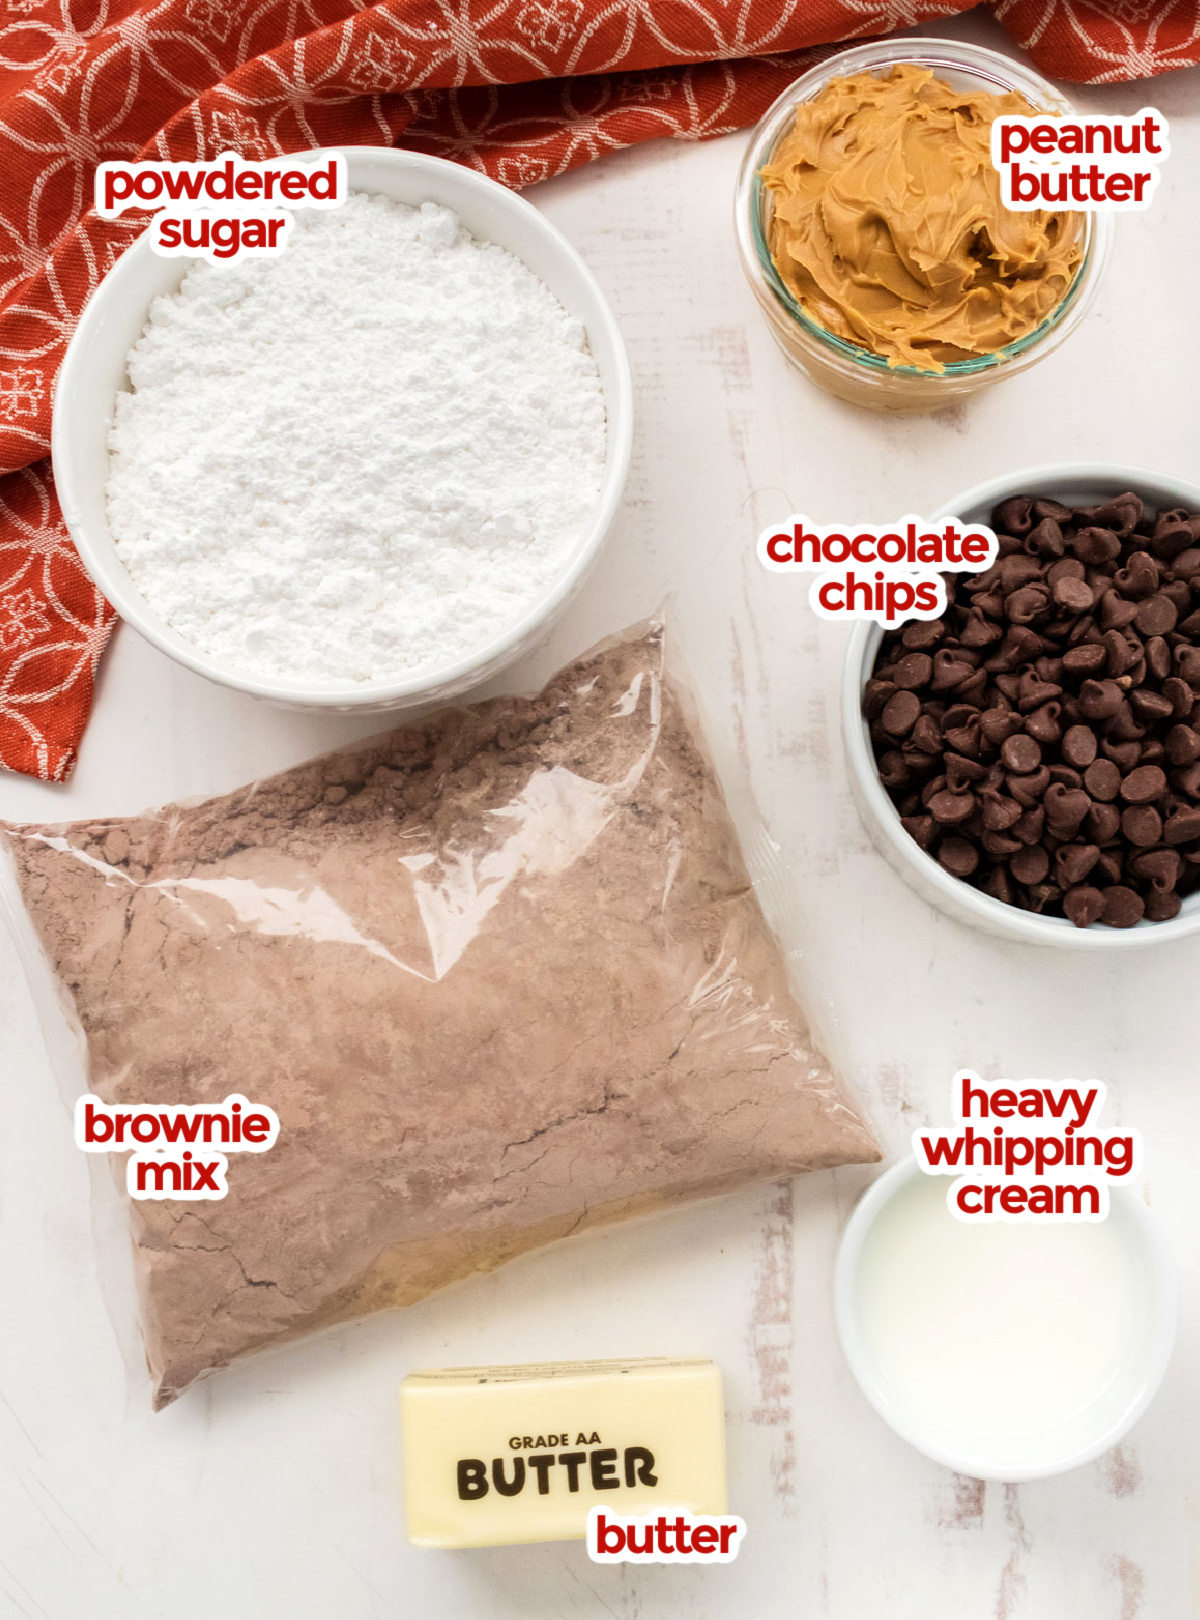 All the ingredients you will need to make Peanut Butter Swirl Brownies including Brownie Mix, Peanut Butter, Powdered Sugar, Butter, Heavy Whipping Cream and Chocolate Chips.